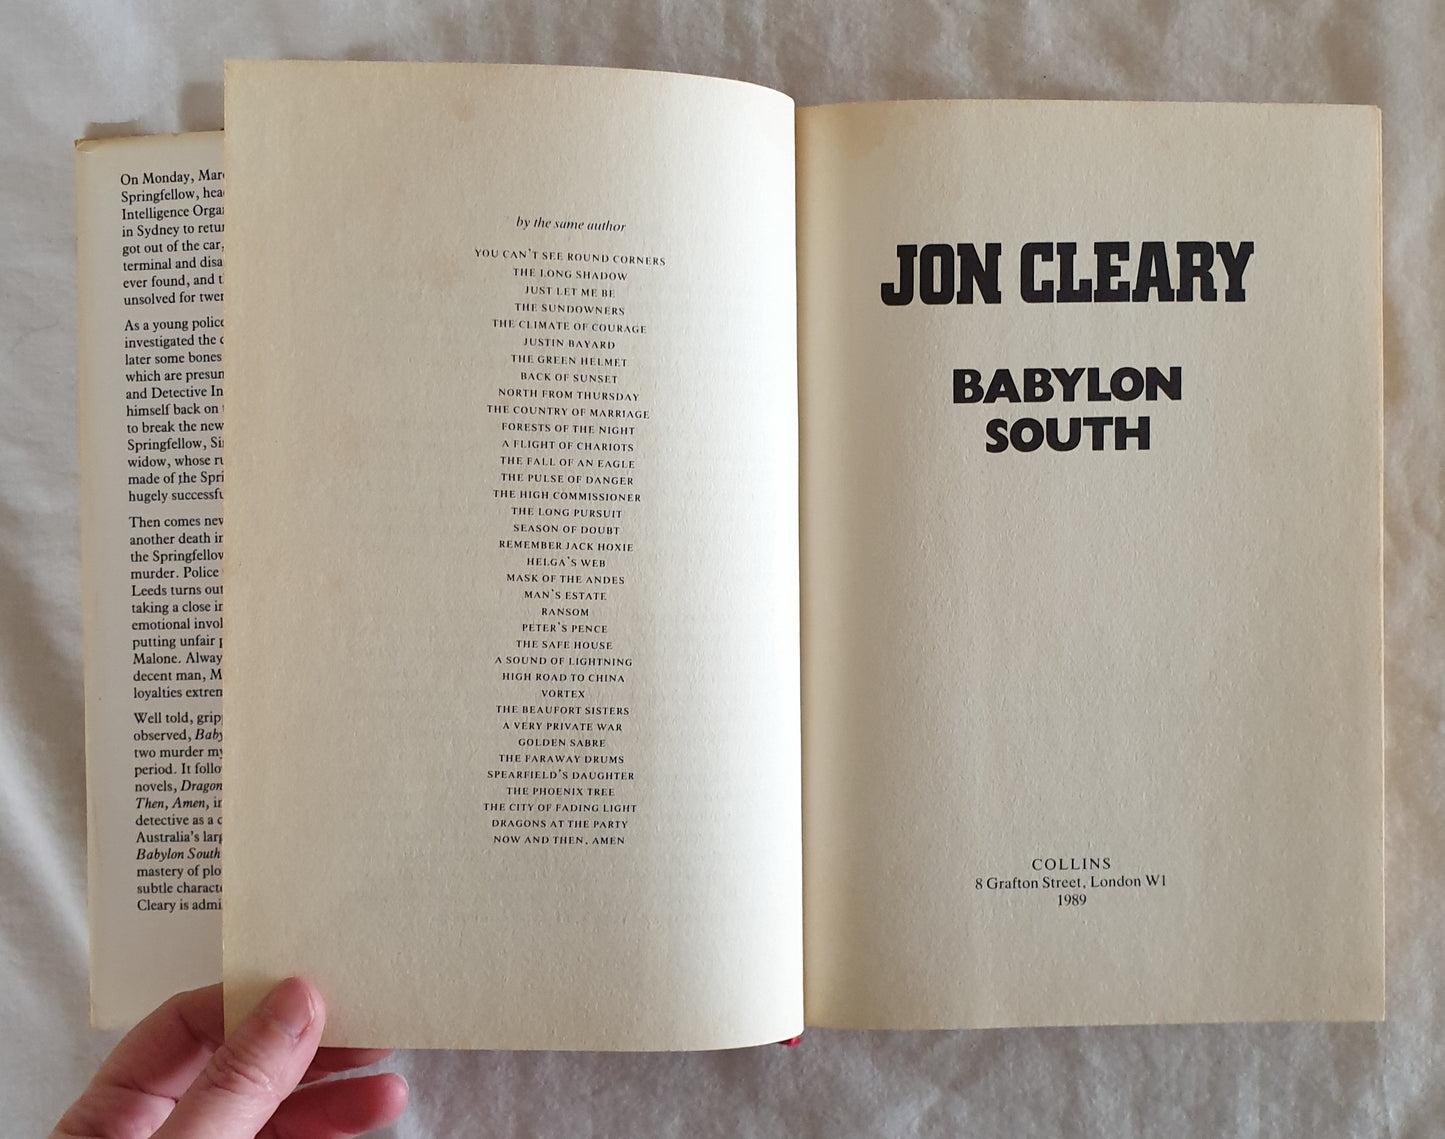 Babylon South by Jon Cleary